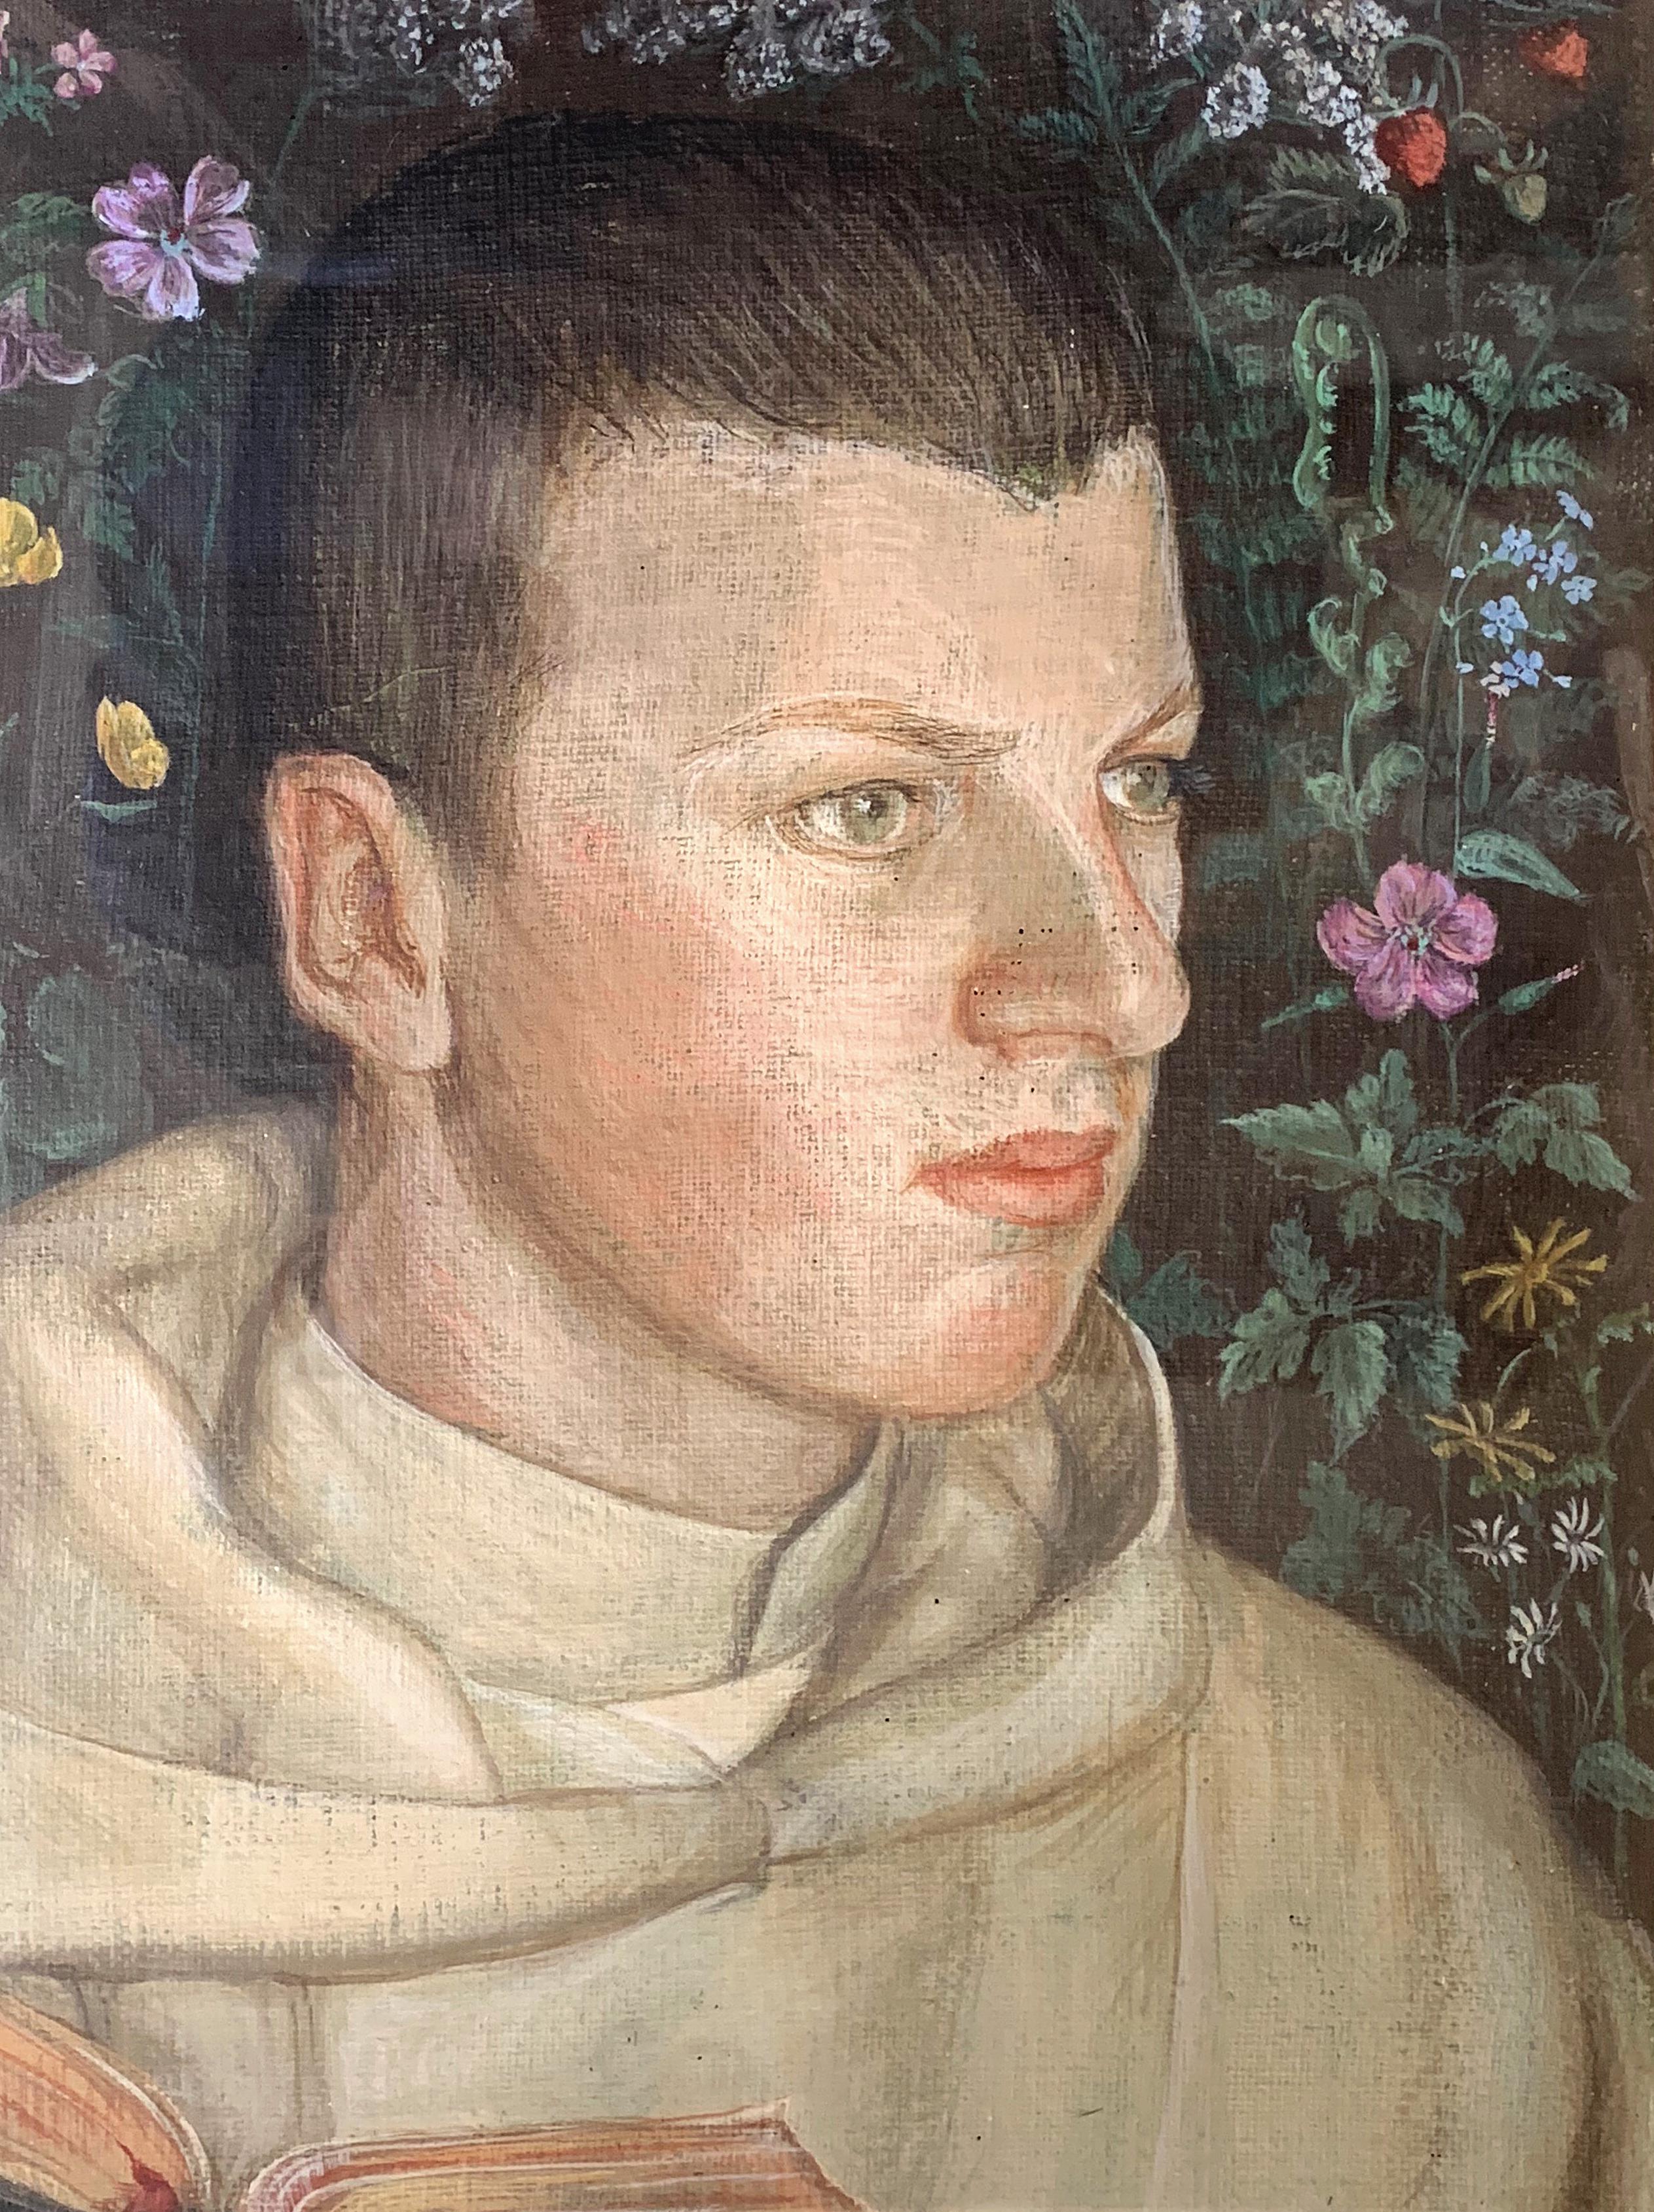 Suffused with youth, rosy health and spirituality, this gorgeous portrait of a young monk in the Camaldolese order, founded in Italy in 1012, was painted in 1934 by Vincentius, no doubt another member of the order. The young man is shown holding a